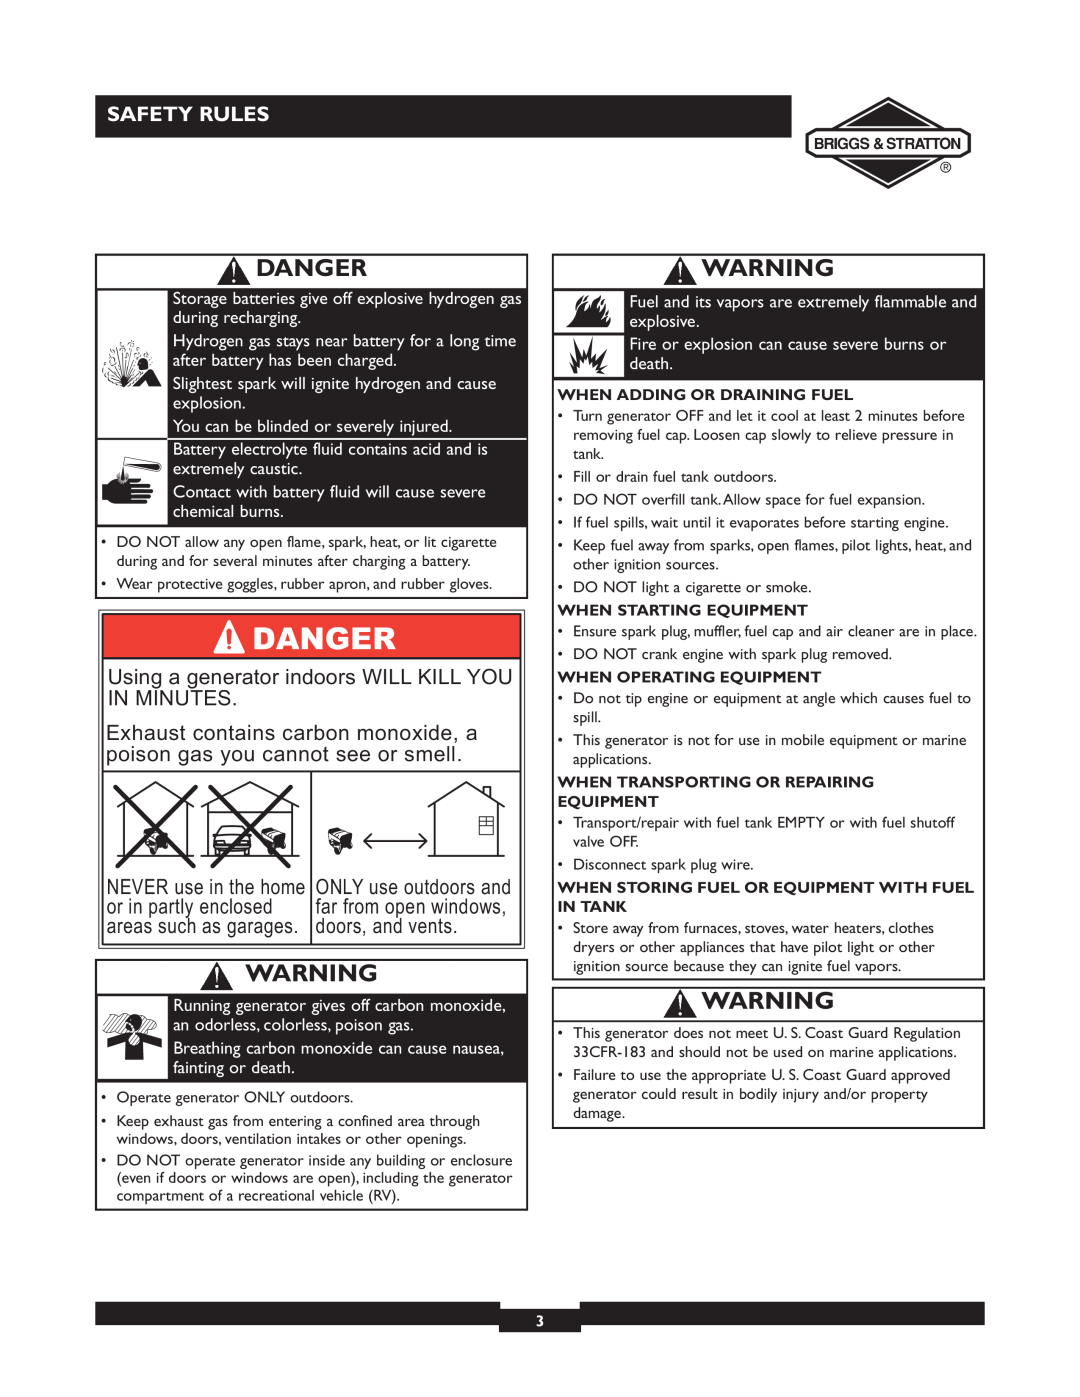 Briggs & Stratton 01894-1 manual Danger, Using a generator indoors WILL KILL YOU IN MINUTES, Safety Rules 